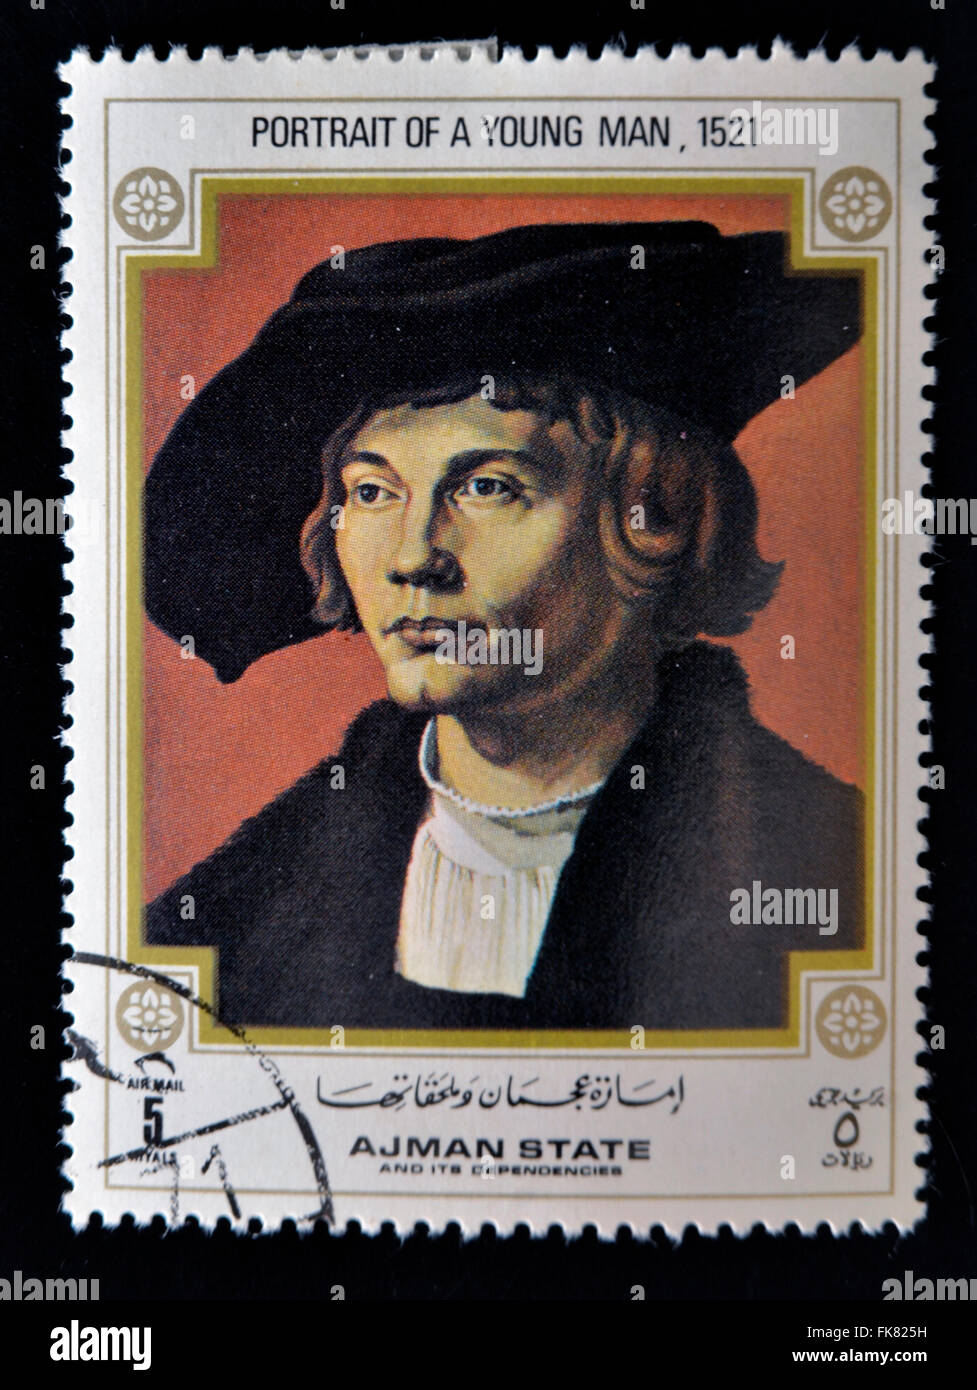 AJMAN - CIRCA 1970: A stamp printed in Ajman shows Portrait of Young Man, by Albrecht Durer (1471-1528), circa 1970 Stock Photo